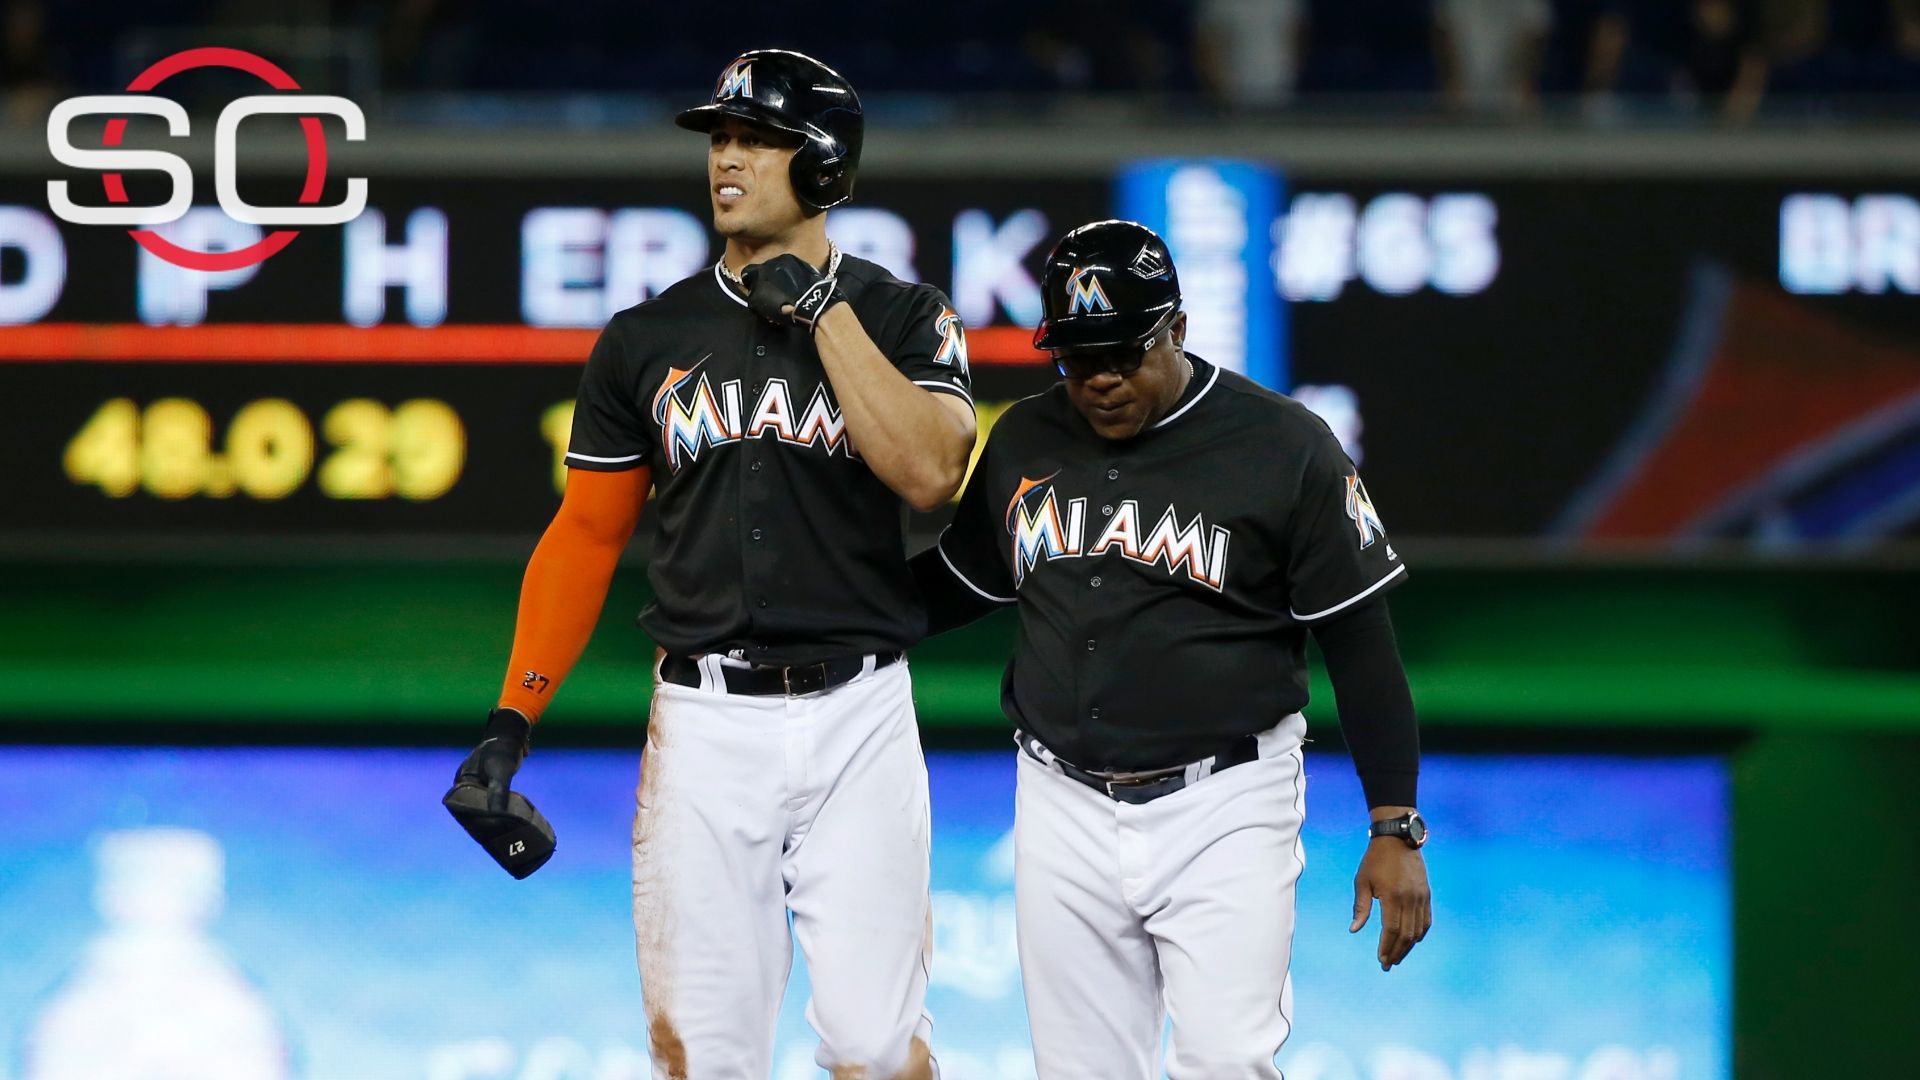 Hit by Pitch, the Miami Marlins' Giancarlo Stanton Is Taken to